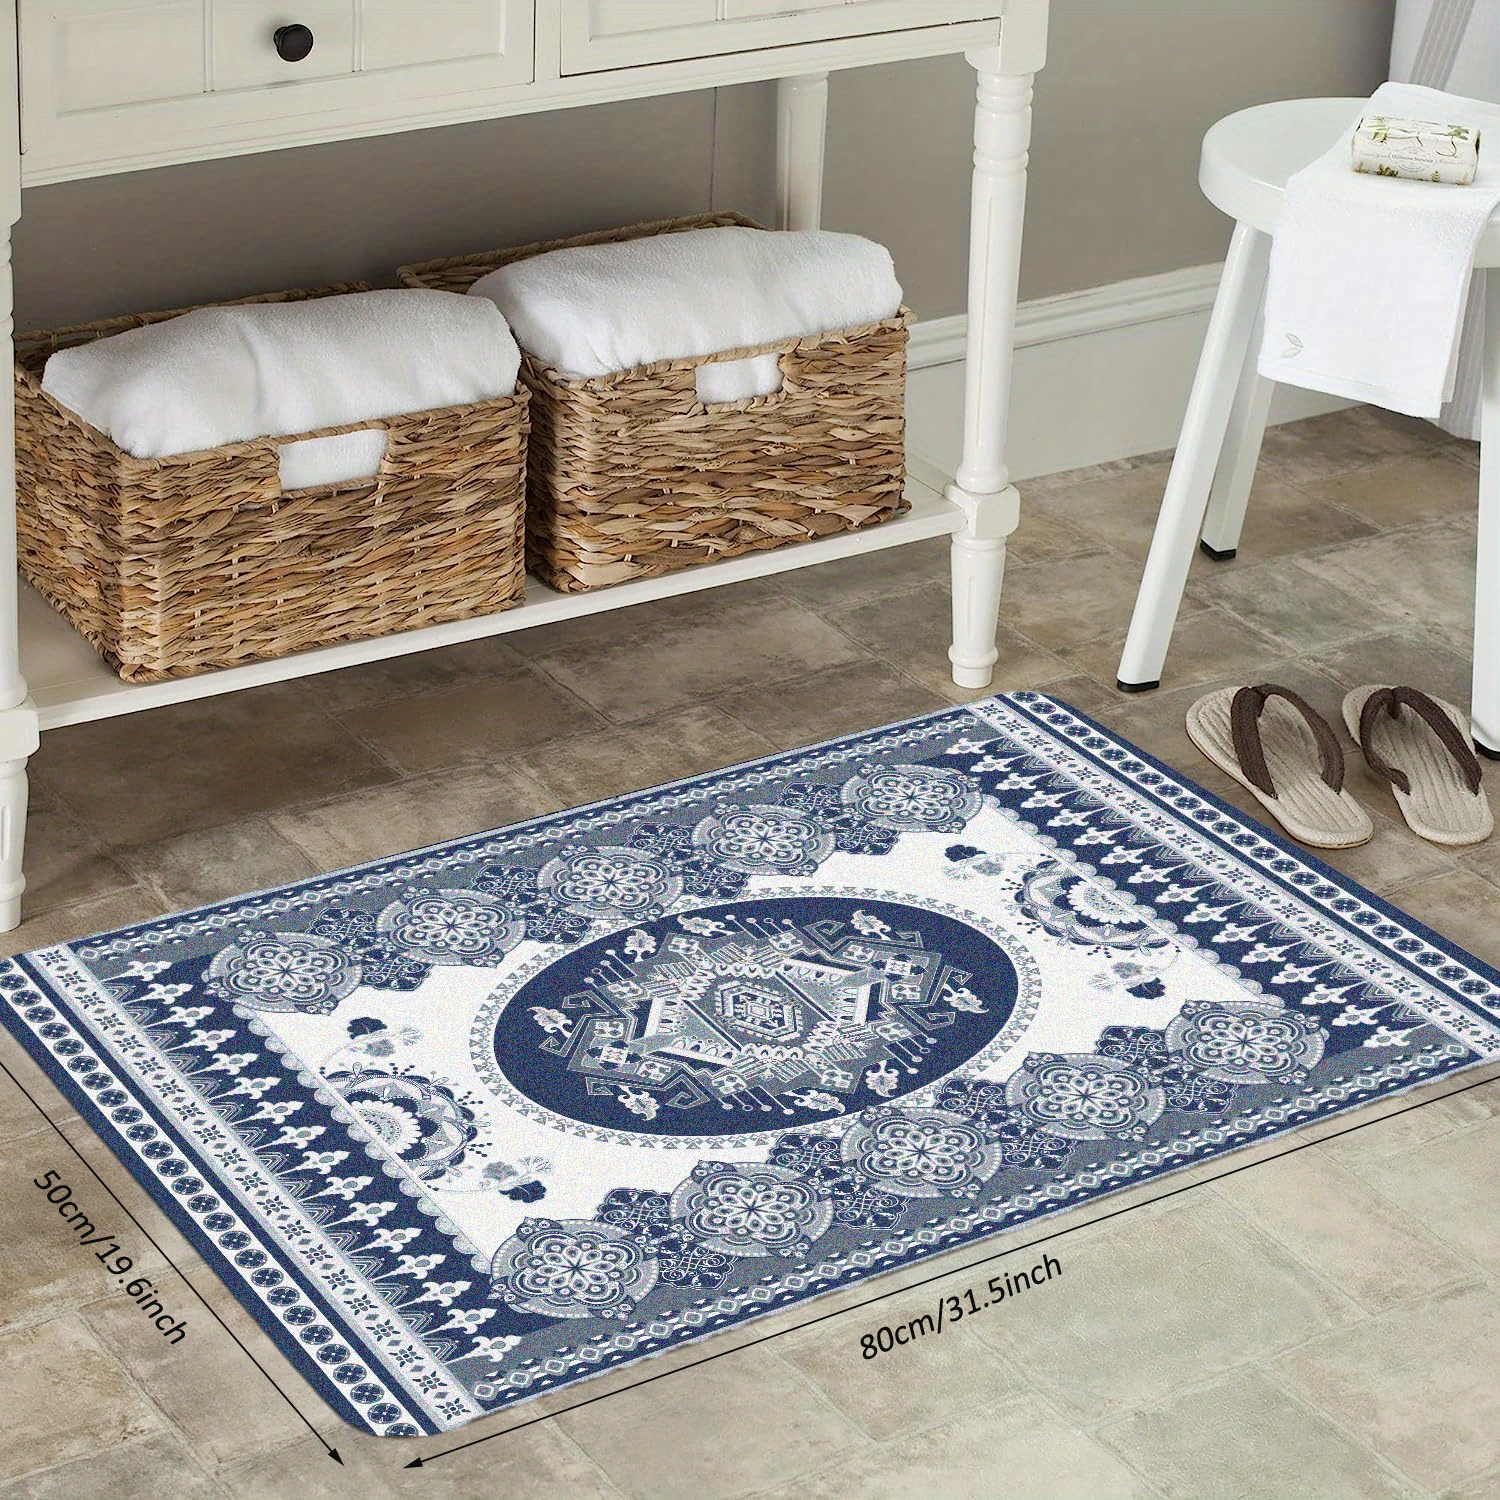 Morebes Vintage Washable Rugs 3x5,Blue Rugs for Bedroom Non Slip,Soft  Distressed Floral Bathroom Mat,Entryway Rugs Indoor Accent Floor Throw  Carpet